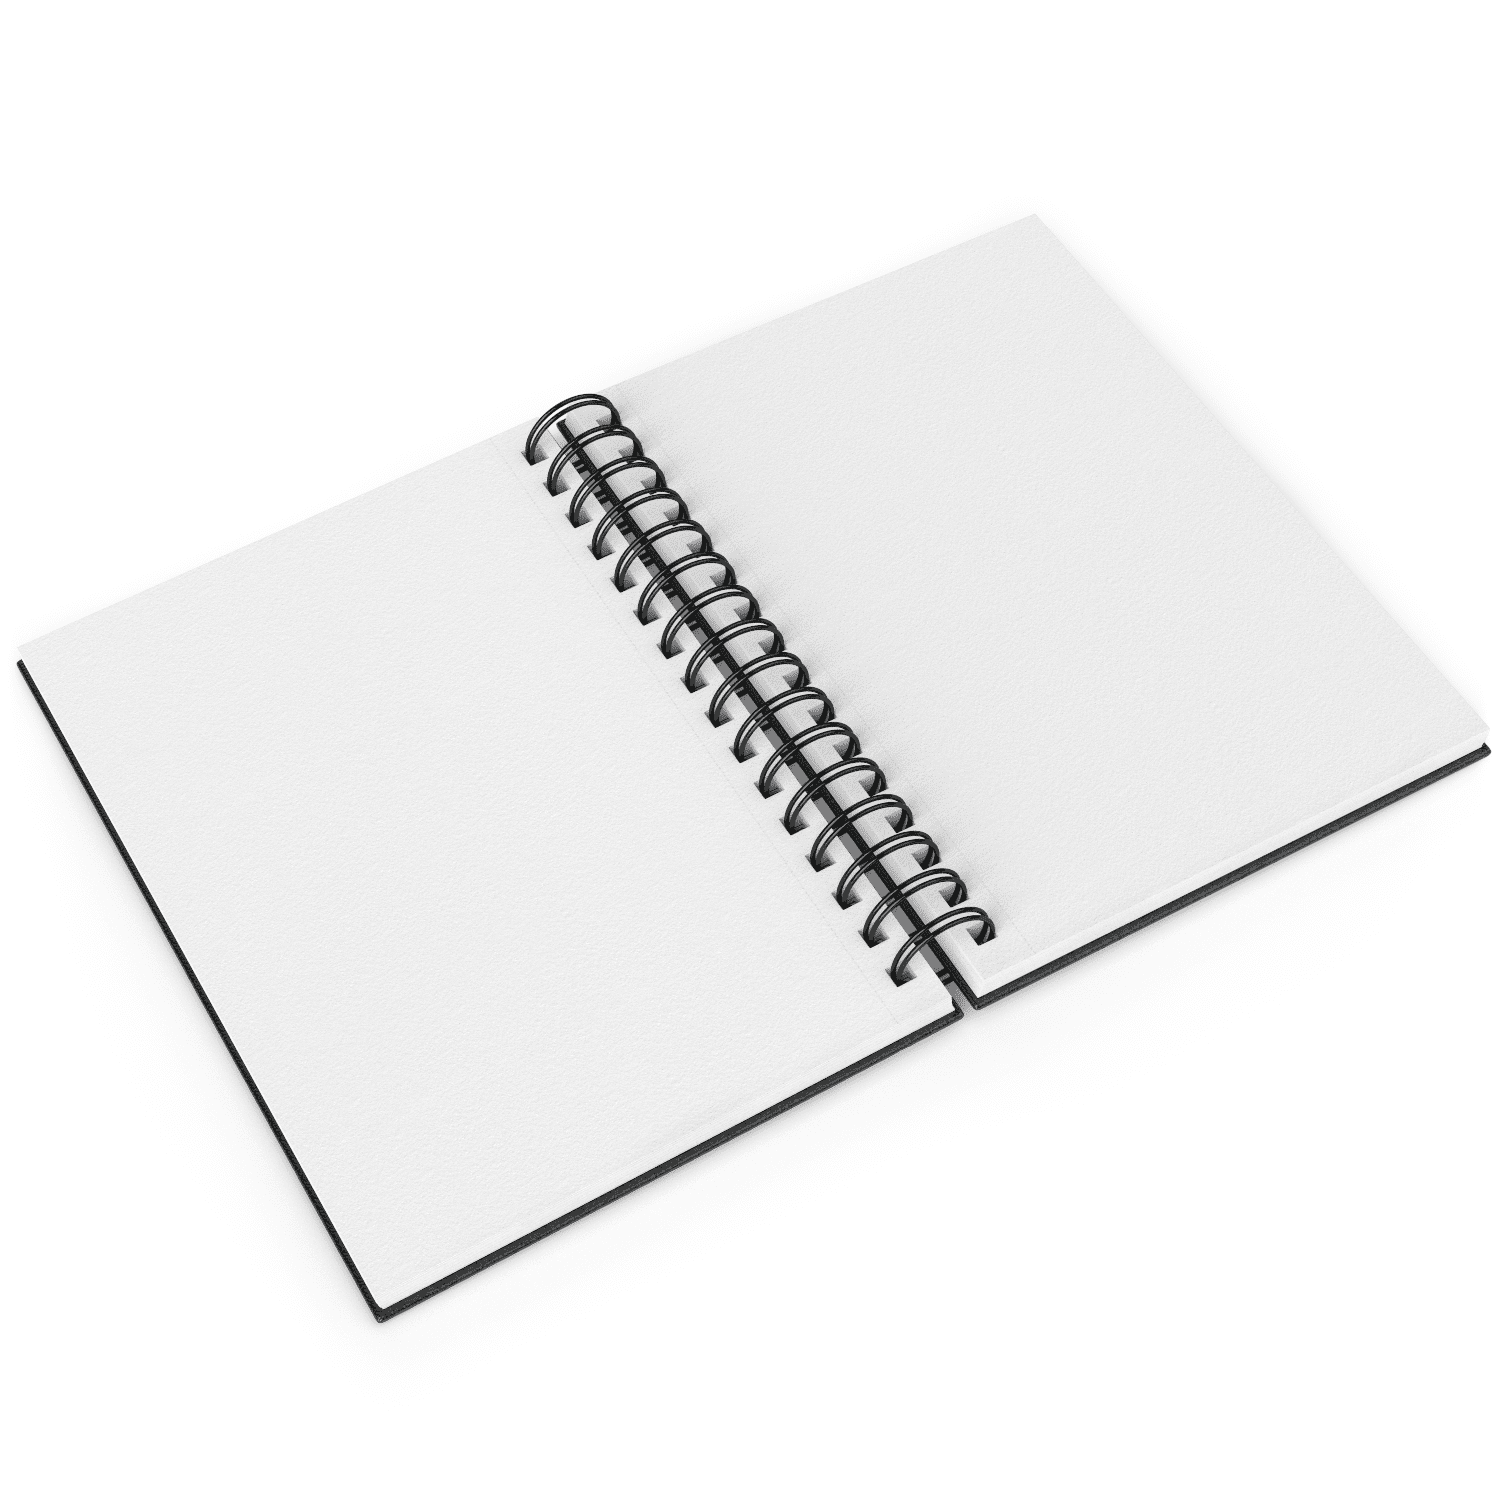 SKETCHBOOKS - (TUFF CITY SKETCHBOOK) Professional quality 200 pages  (5.5X8.2)